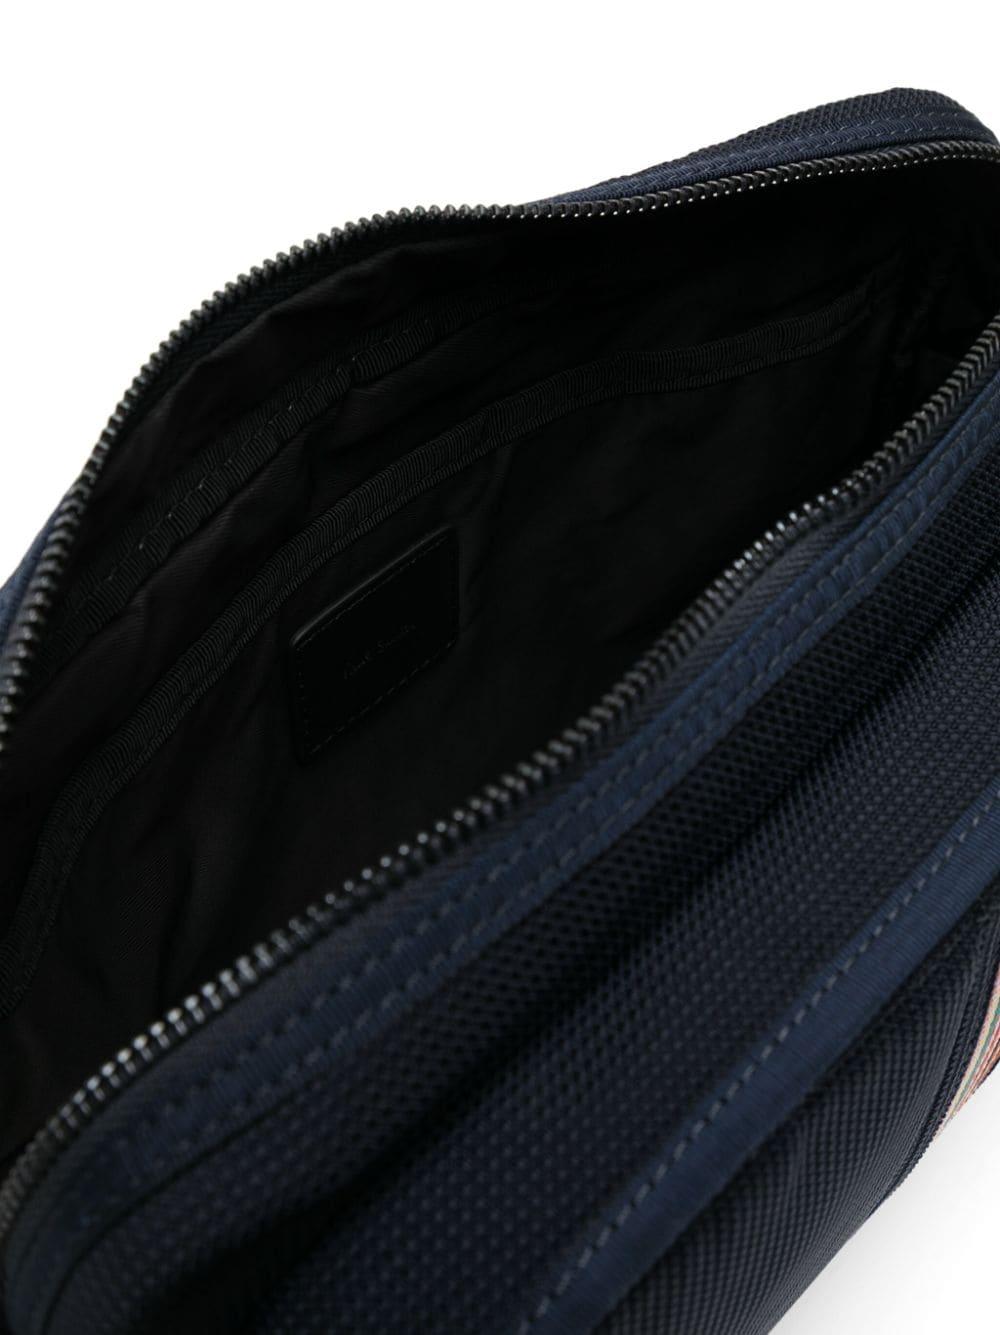 PAUL SMITH Embossed Textured-Leather Messenger Bag for Men  Leather  messenger, Messenger bag men, Leather messenger bag